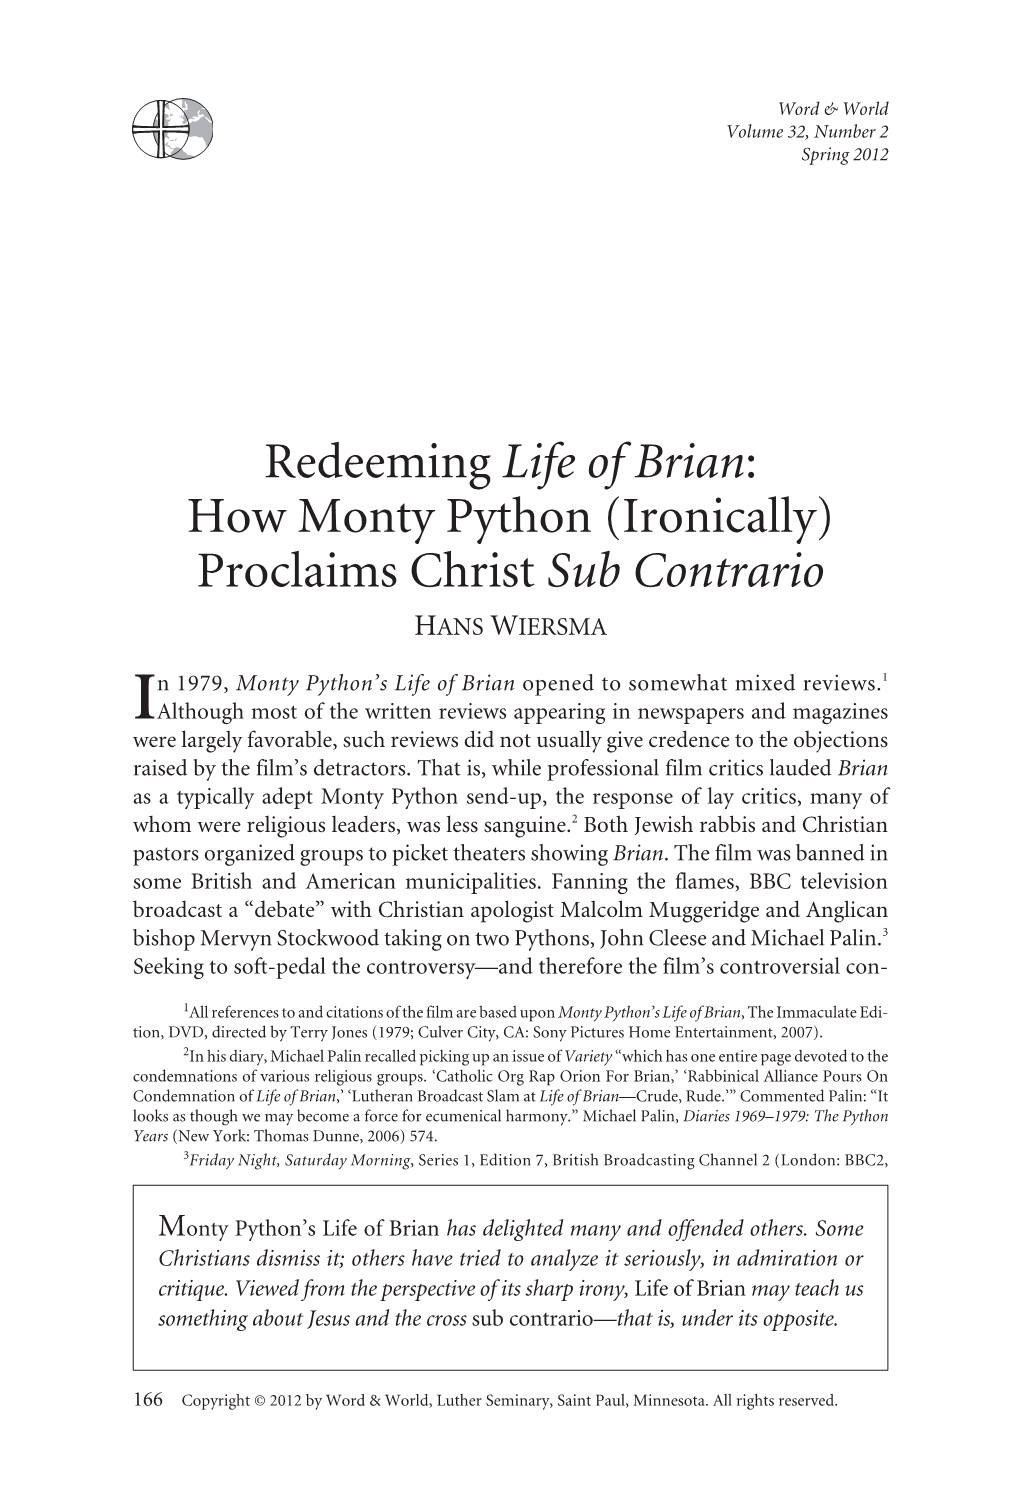 Redeeming Life of Brian: How Monty Python (Ironically) Proclaims Christ Sub Contrario HANS WIERSMA